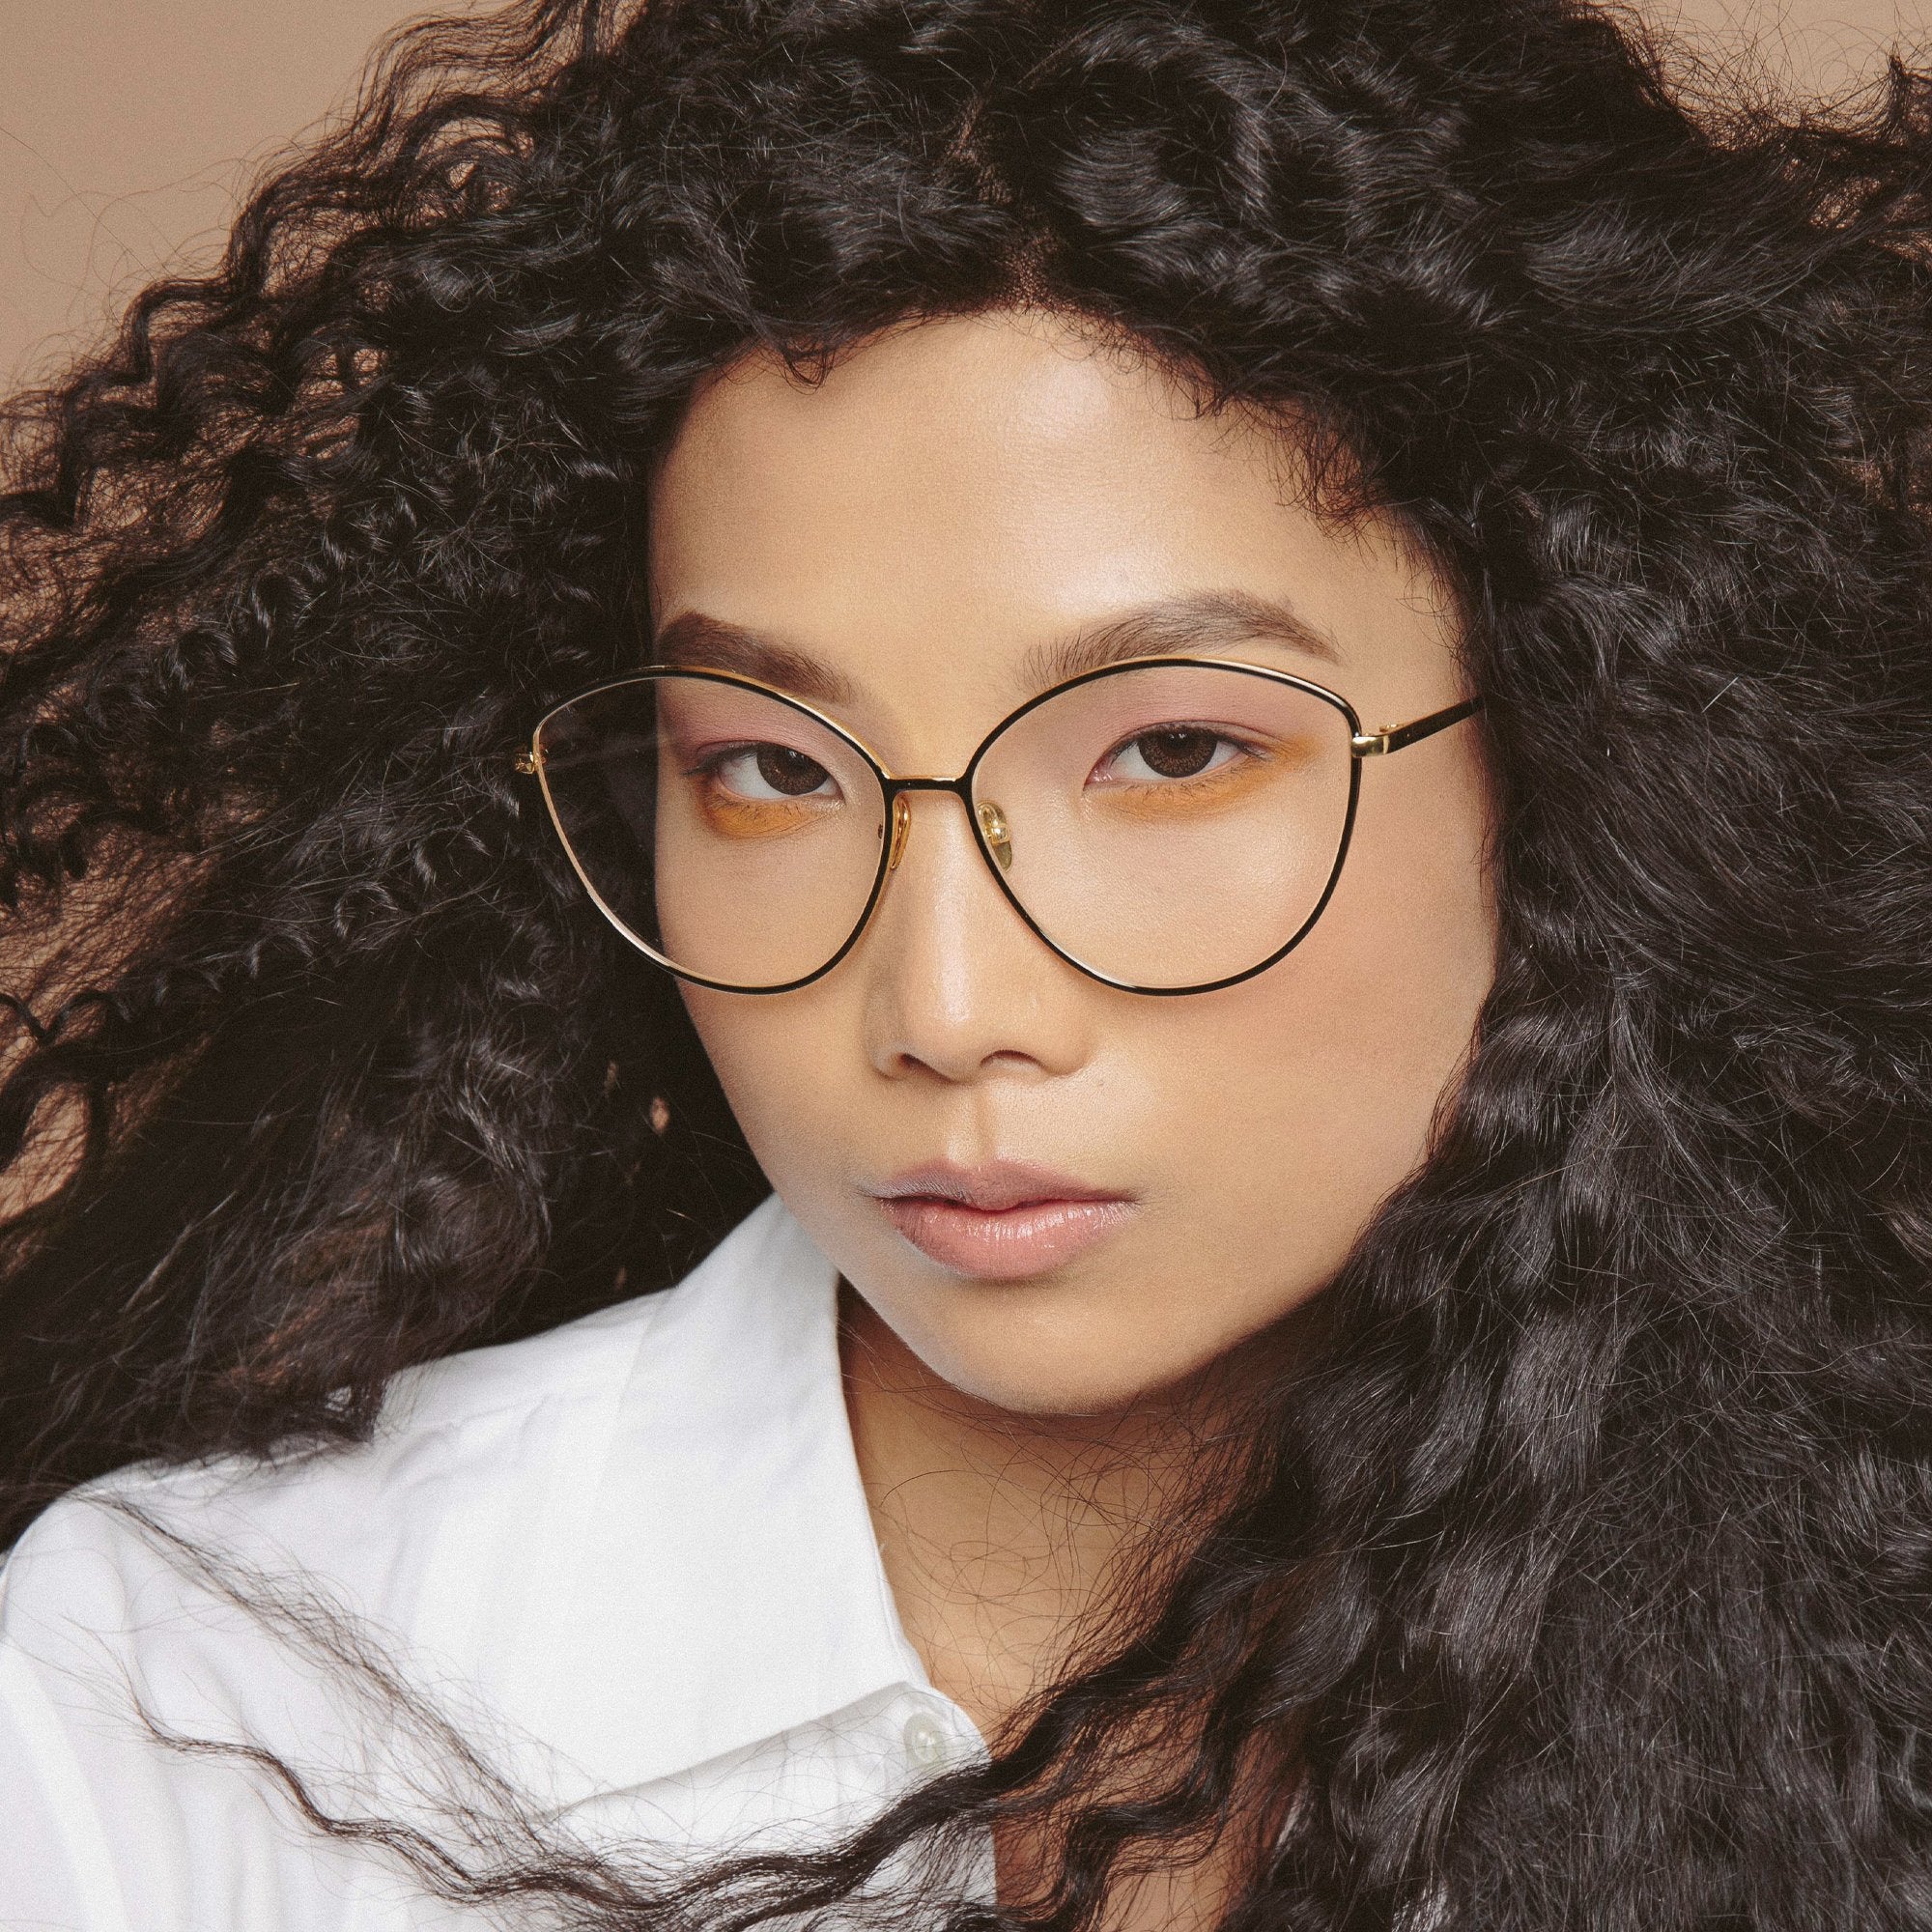 Color_LFL1149C7OPT - Francis Cat Eye Optical Frame in Light Gold